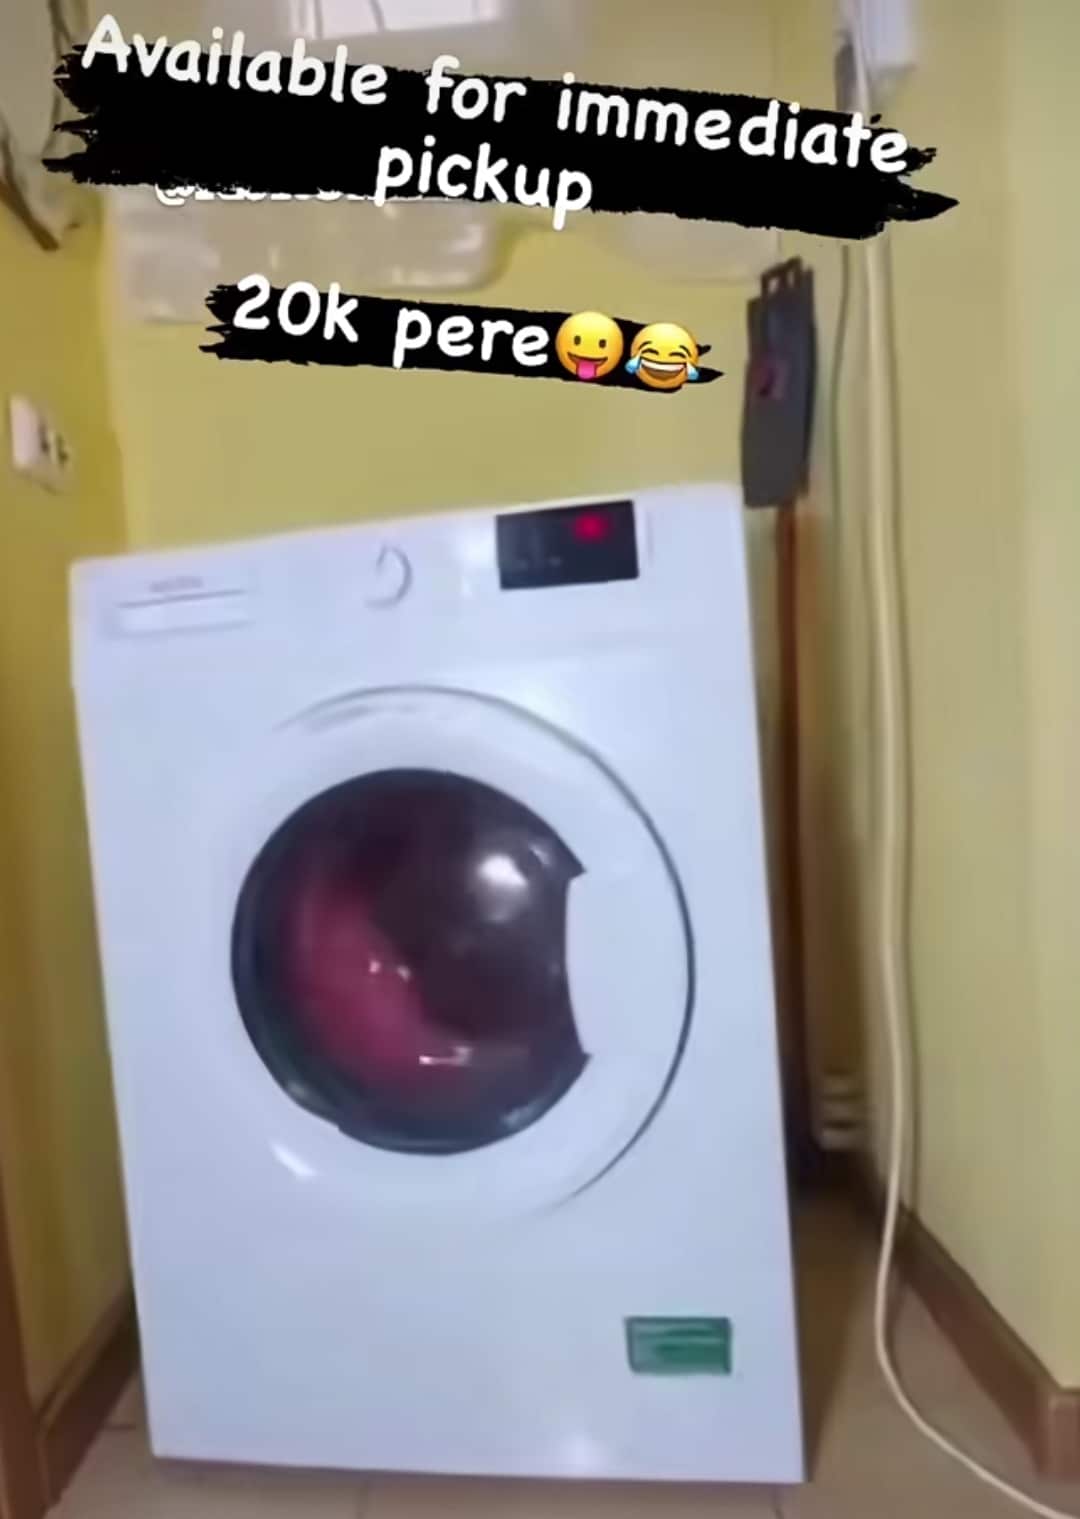 "E get anger issues" - Lady causes stir, advertises washing machine that sounds and moves like faulty generator for 20k